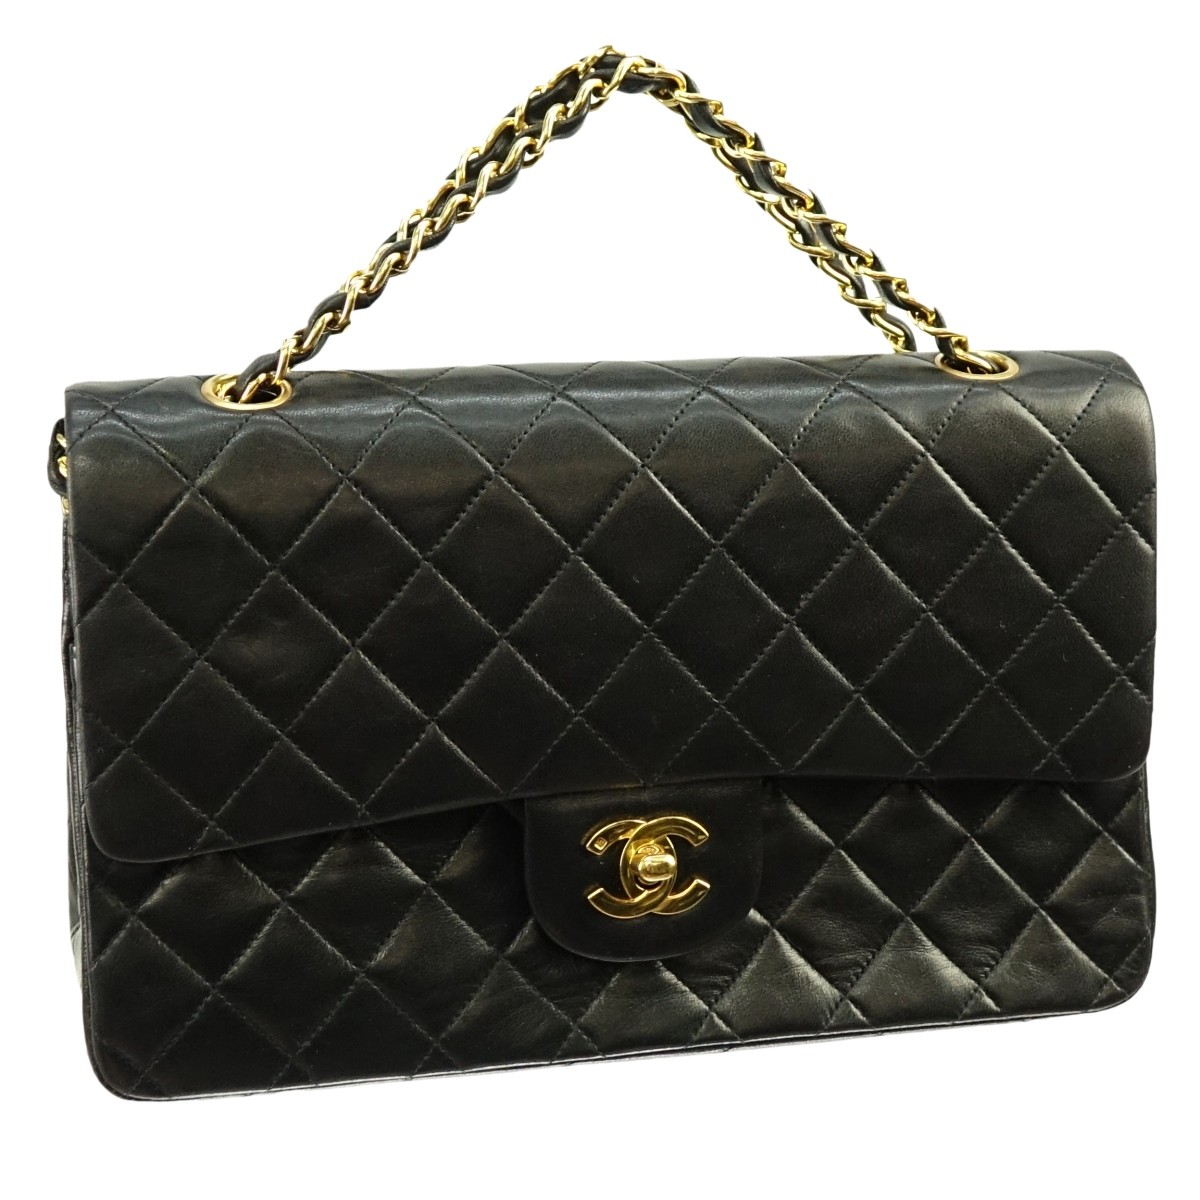 Chanel Black Quilted Leather Double Flap Bag 26